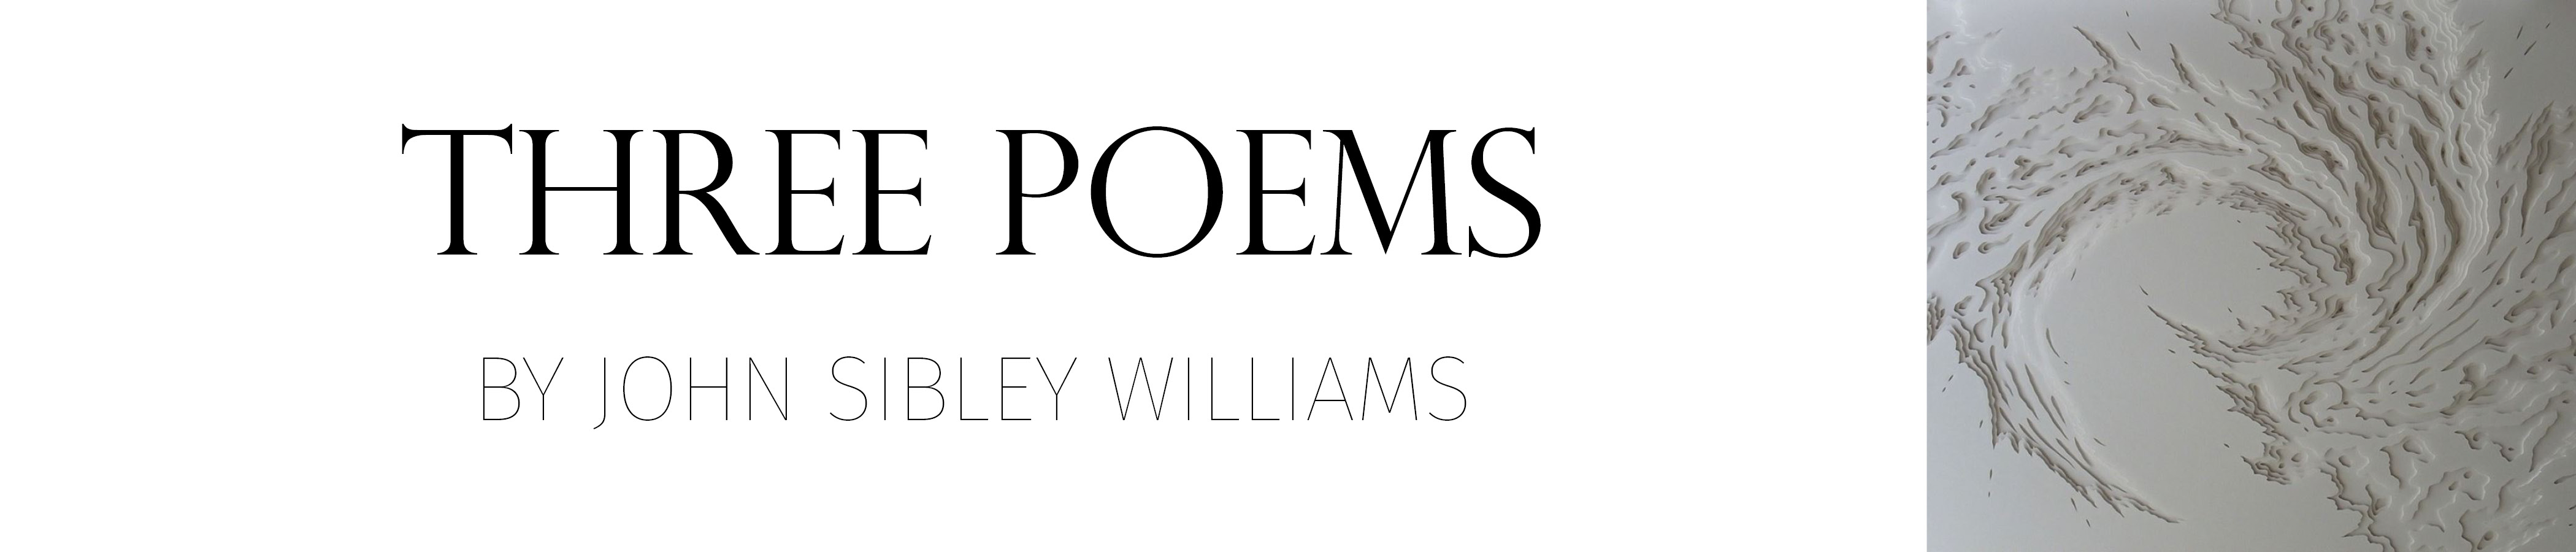 POETRY Sibley Williams